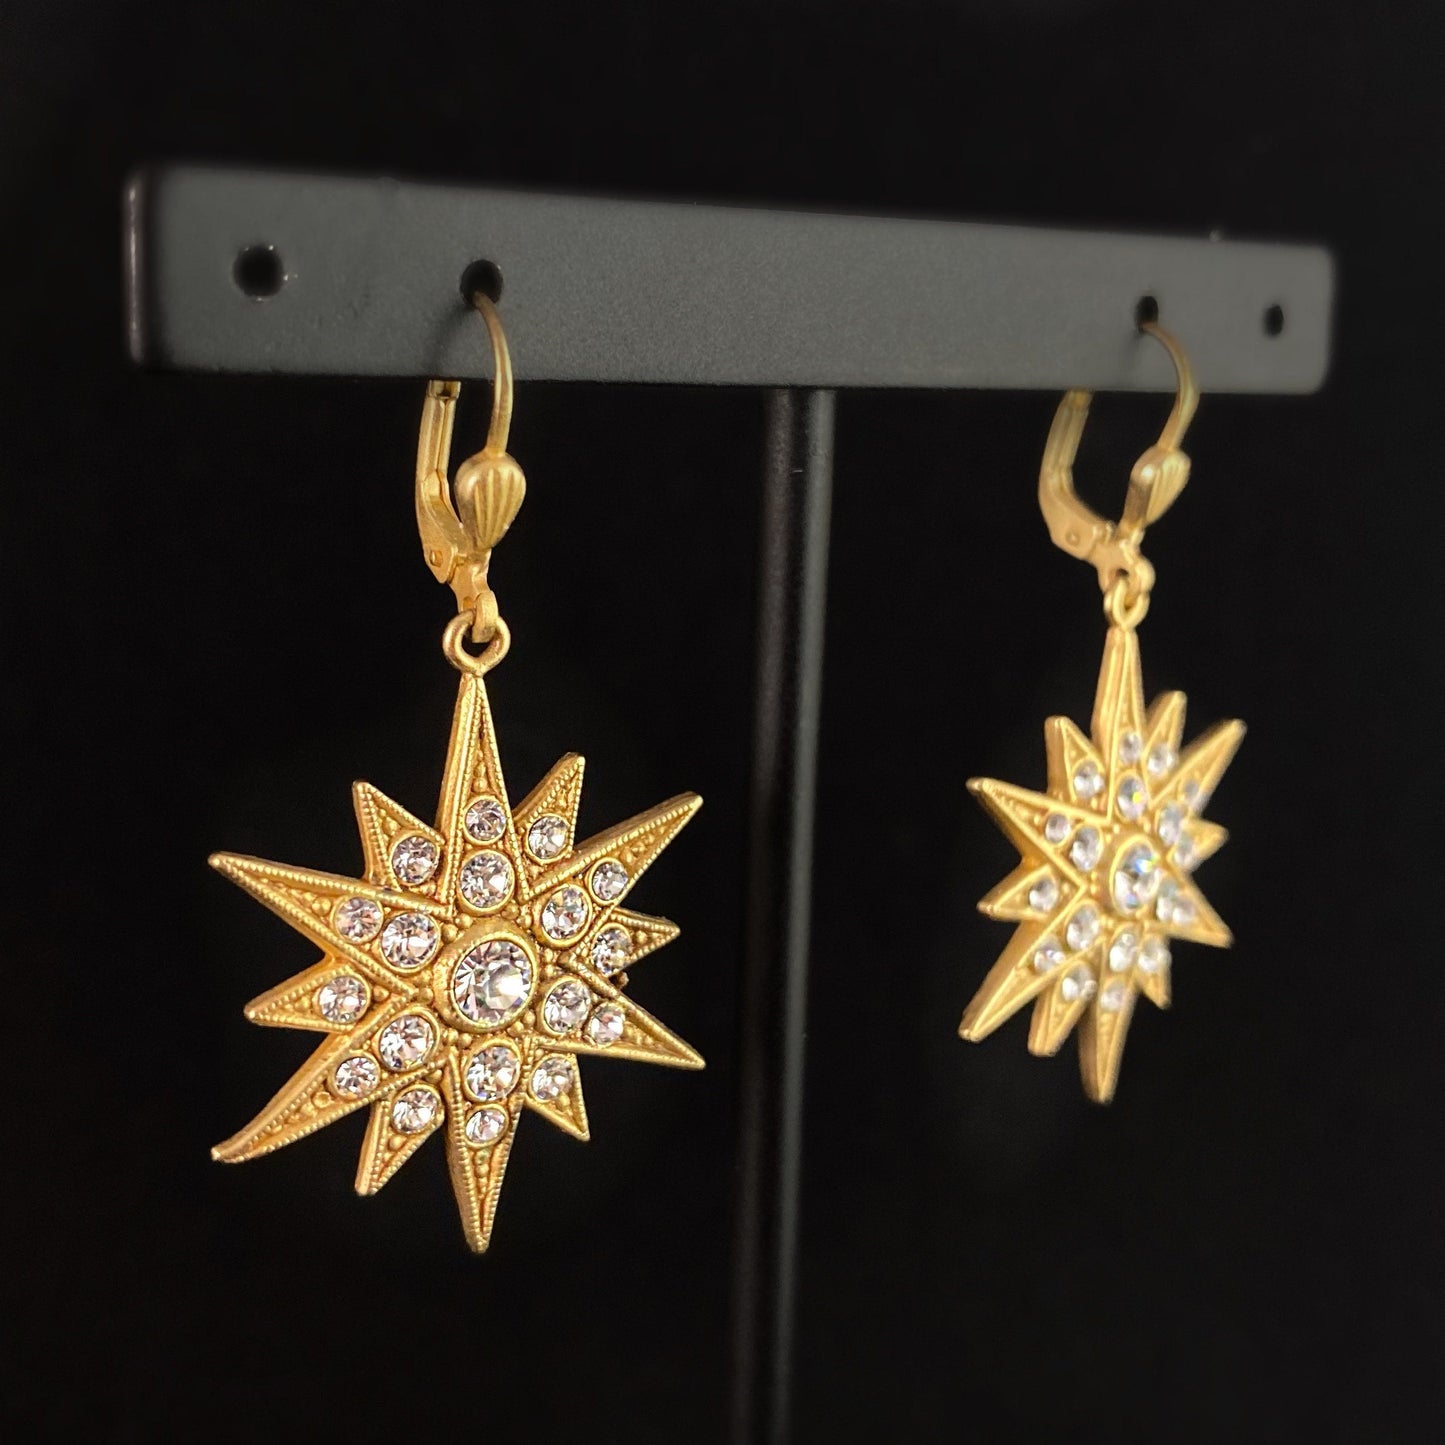 Gold Art Deco Star Earrings with Clear Swarovski Crystals - La Vie Parisienne by Catherine Popesco